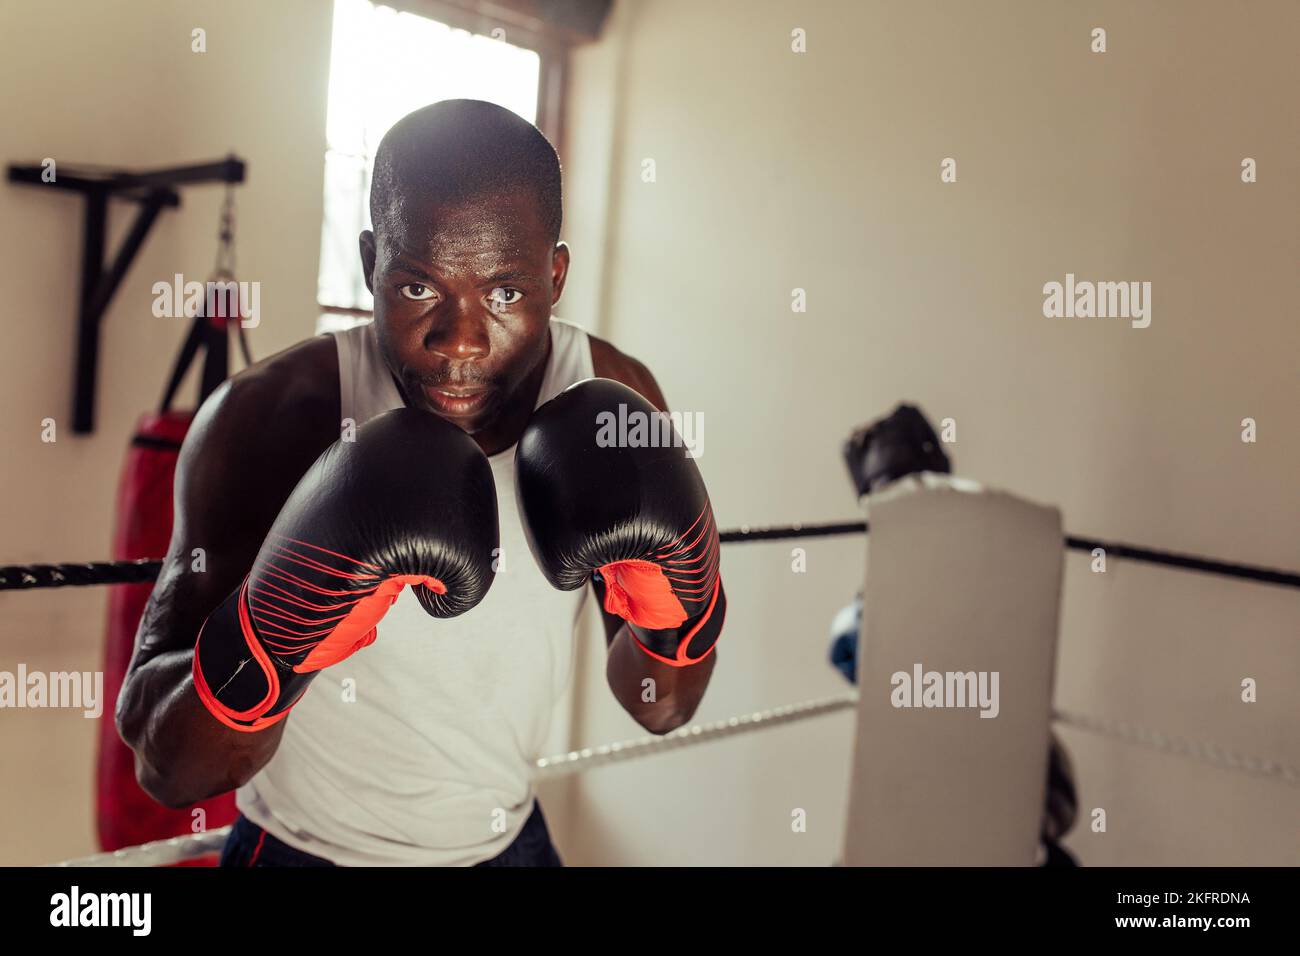 Focused young boxer looking at the camera while standing in fighting position with boxing gloves. Sporty young man training in a boxing gym. Stock Photo